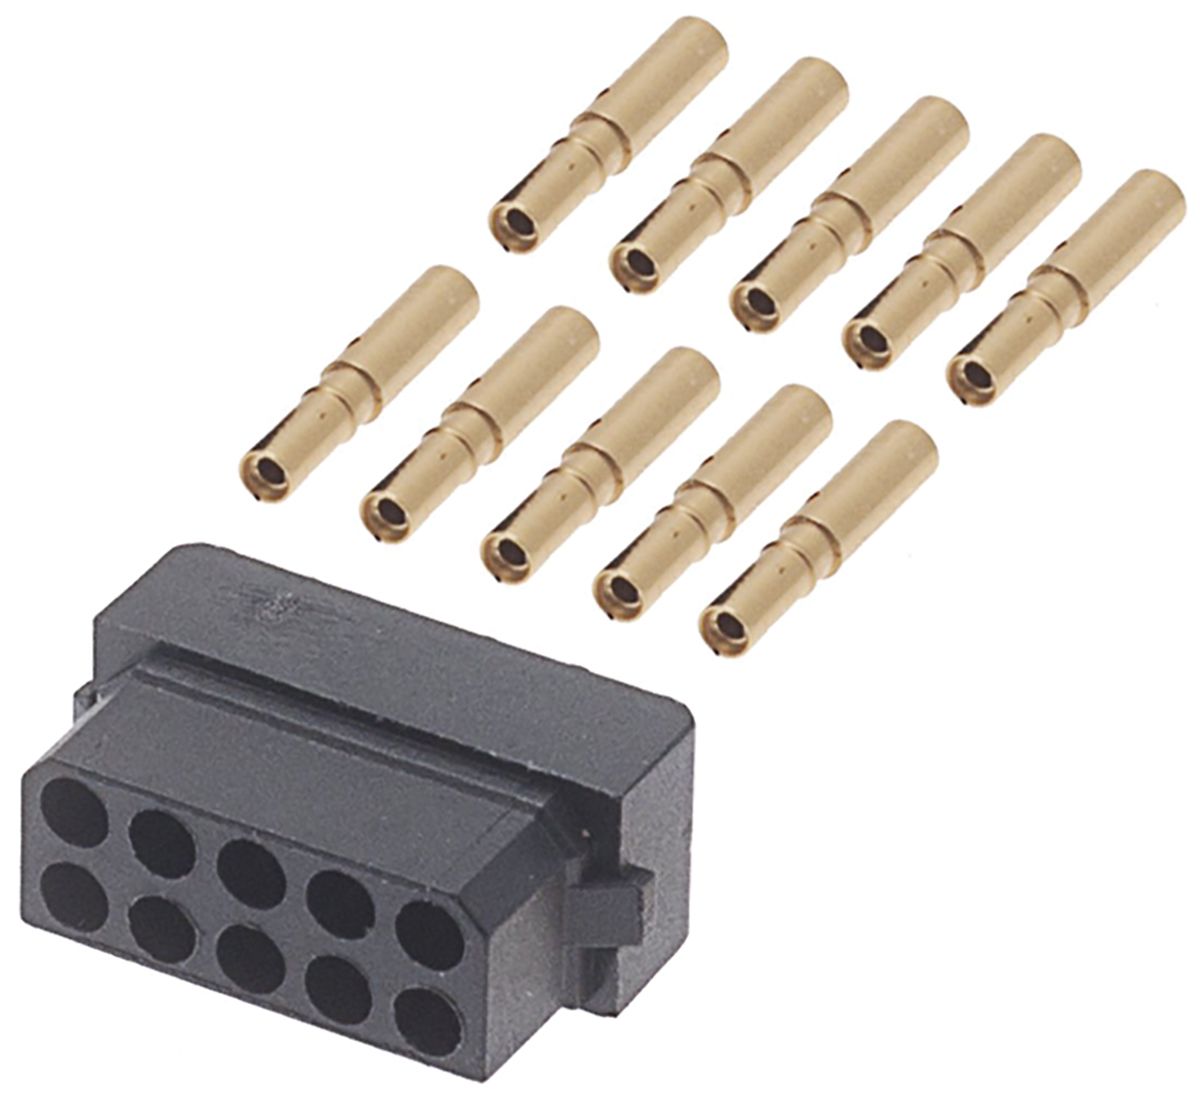 Datamate Connector Kit Containing 10 way DIL Female Shell, Crimps